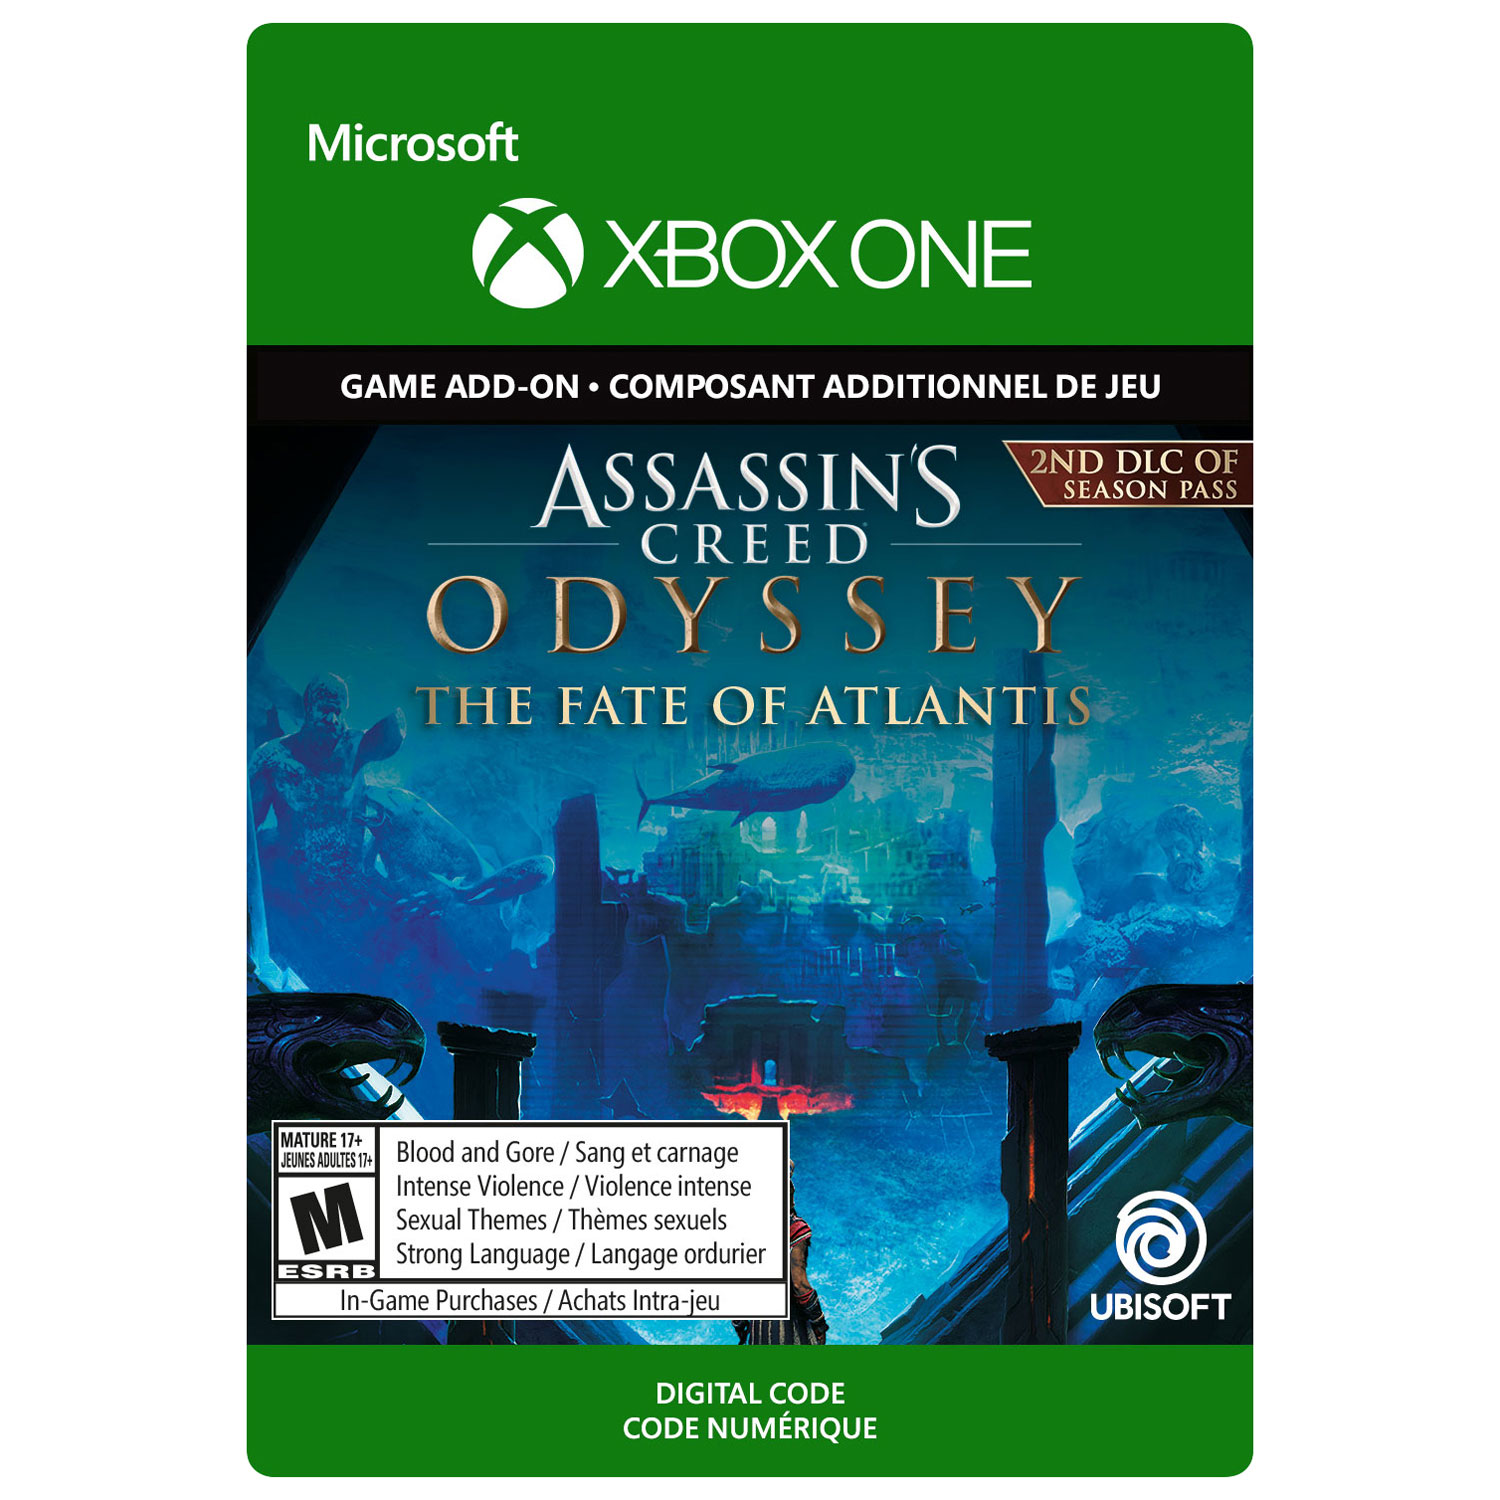 Assassin's Creed Odyssey: The Fate of Atlantis (Xbox One) - Digital Download